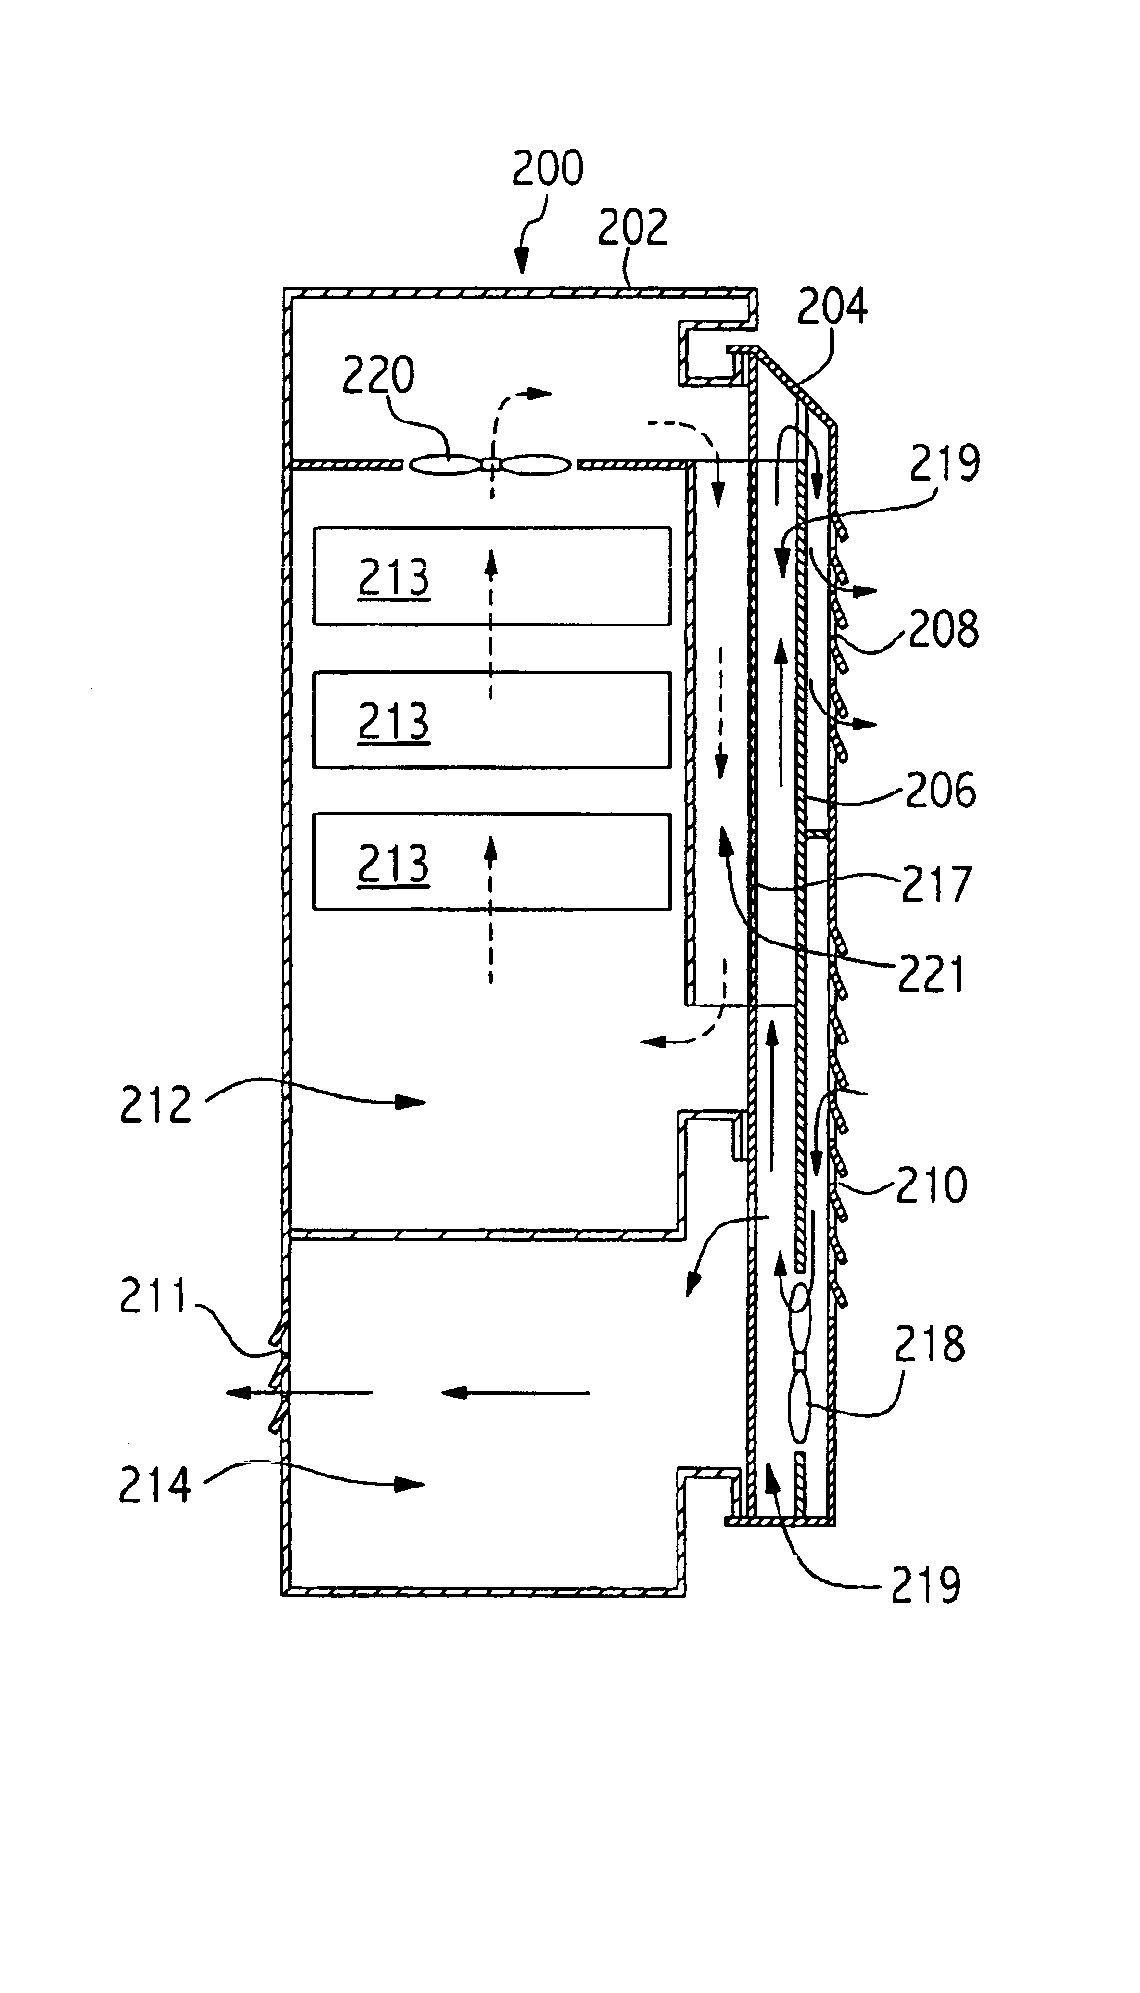 Systems and methods for weatherproof cabinets with multiple compartment cooling